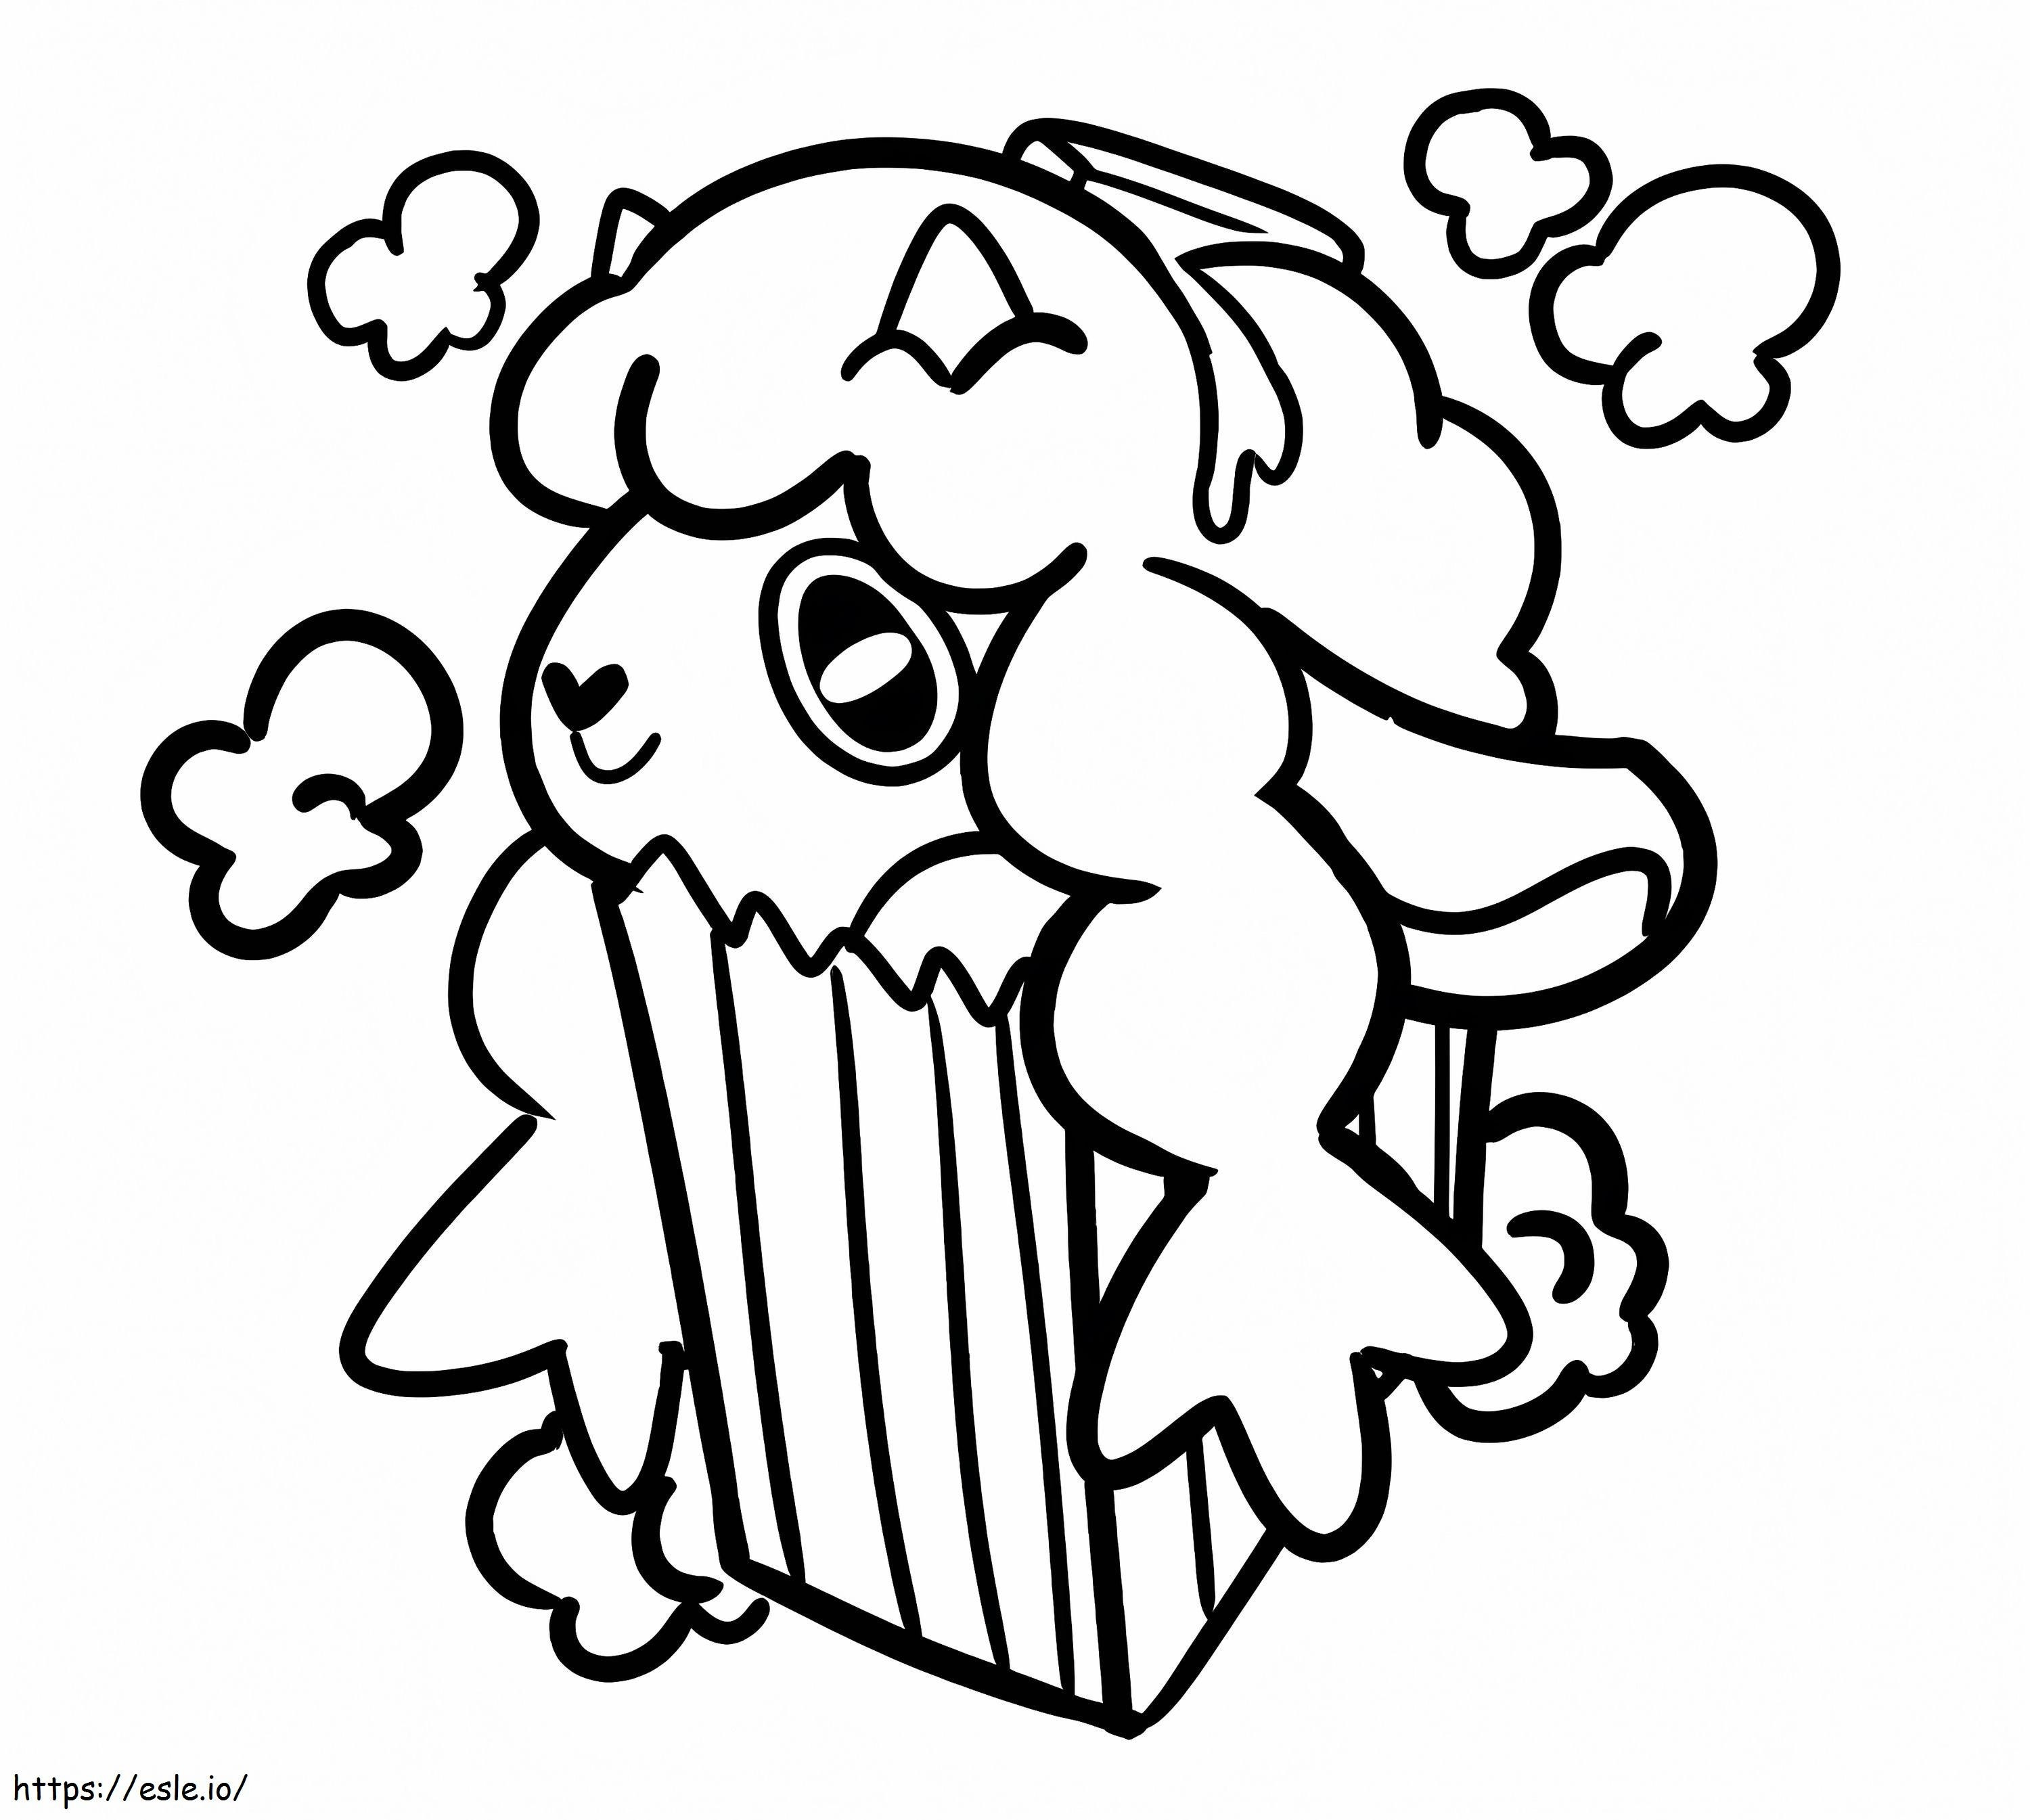 Wooloo Pokemon 2 Coloring Page coloring page